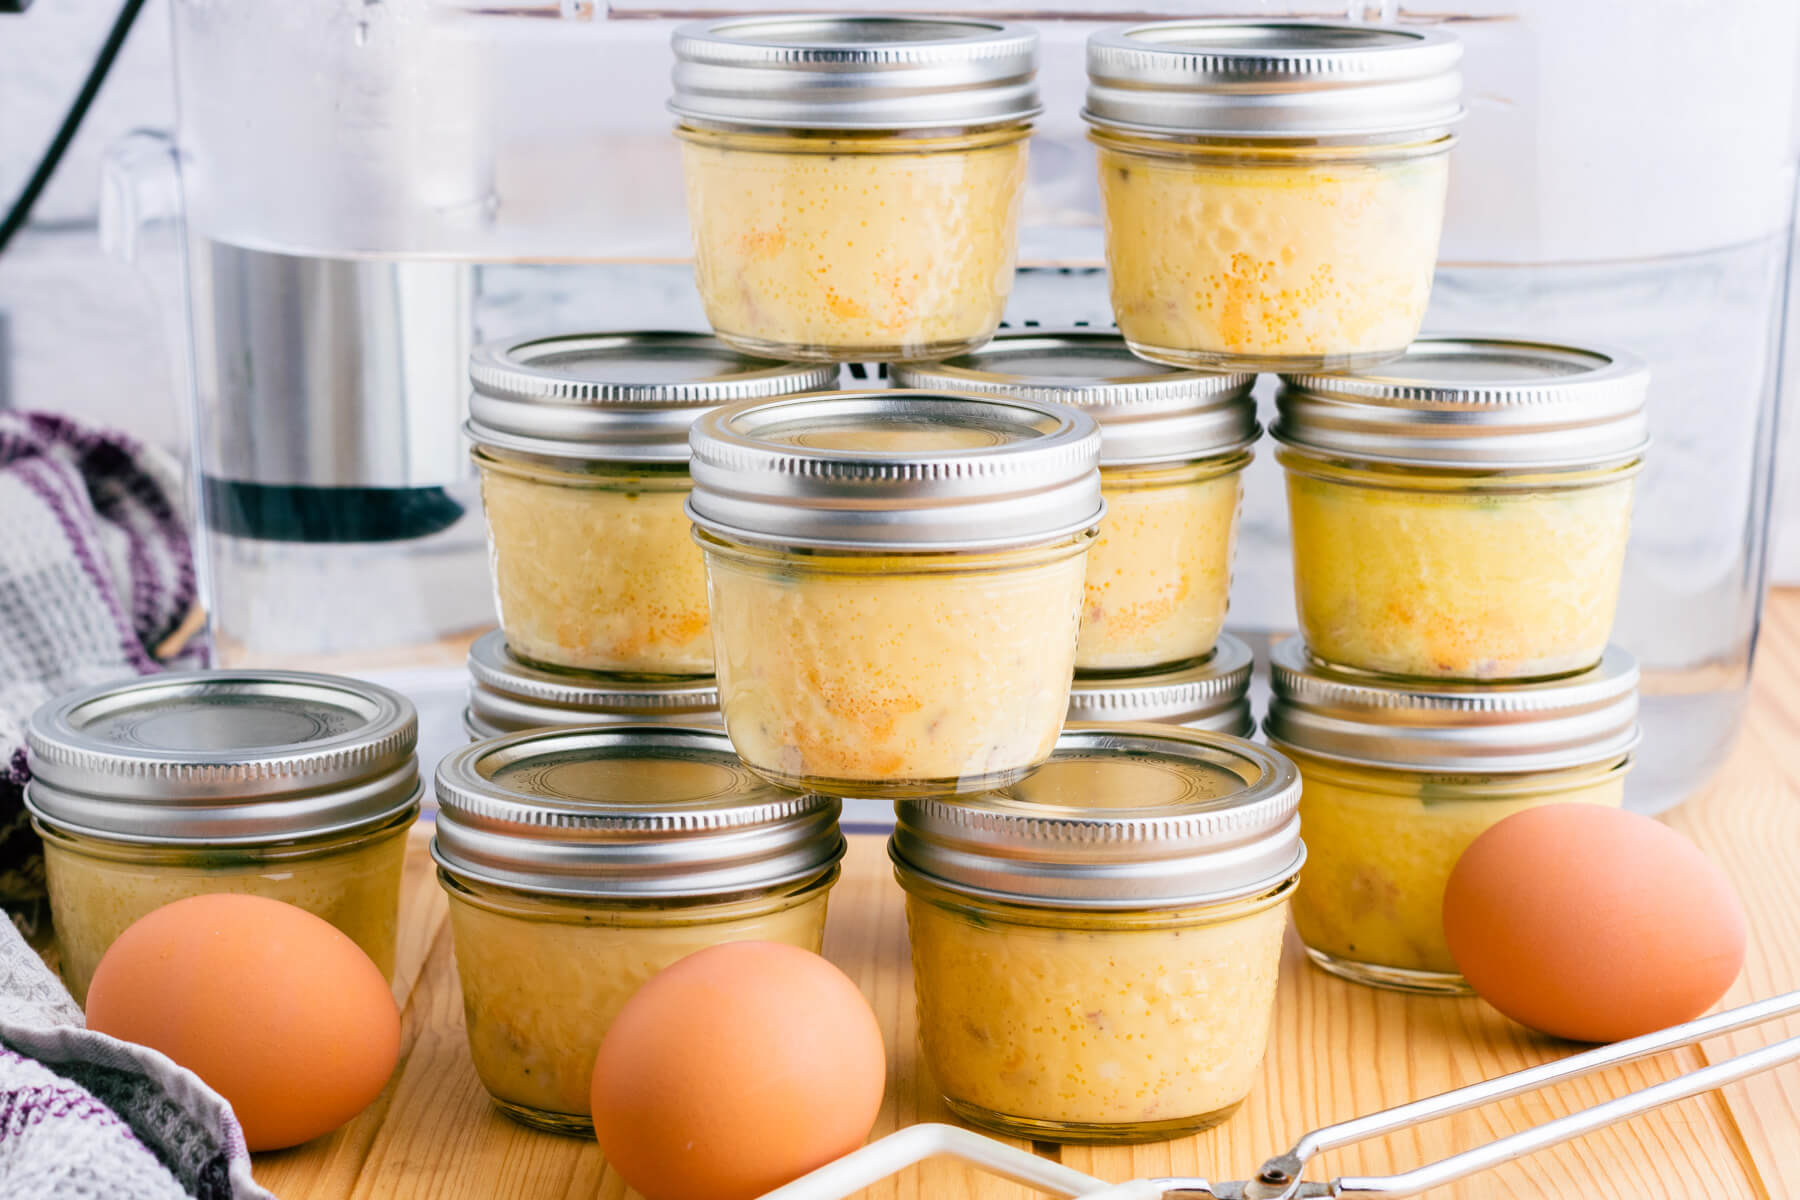 Stacks of Sous Vide Egg Bites in glass jars and brown eggs in front of a sous vide container.